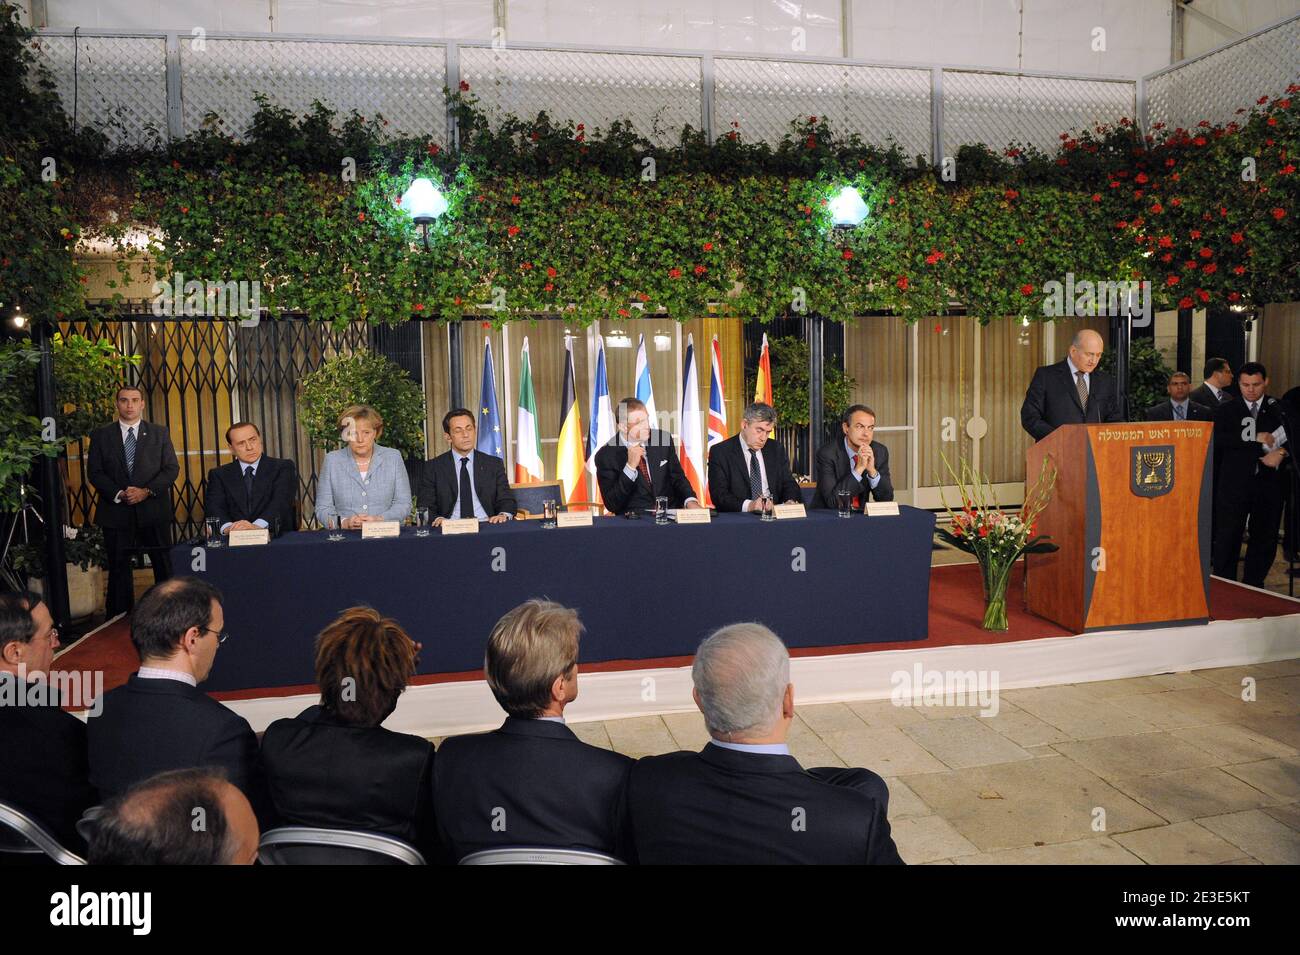 From R : Israeli Prime Minister Ehud Olmert, Spanish Prime Minister Jose Luis Rodriguez Zapatero, Great Britain's Prime Minister Gordon Brown, Czech Prime Minister Mirek Topolanek, French President Nicolas Sarkozy and German Chancellor Angela Merkel and Italian Prime Minister Silvio Berlusconi seen during a joint press conference at the residence of Israeli Prime Minister Ehud Olmert in Jerusalem, Israel on January 18, 2009. Photo by Ammar Abd Rabbo/ABACAPRESS.COM Stock Photo